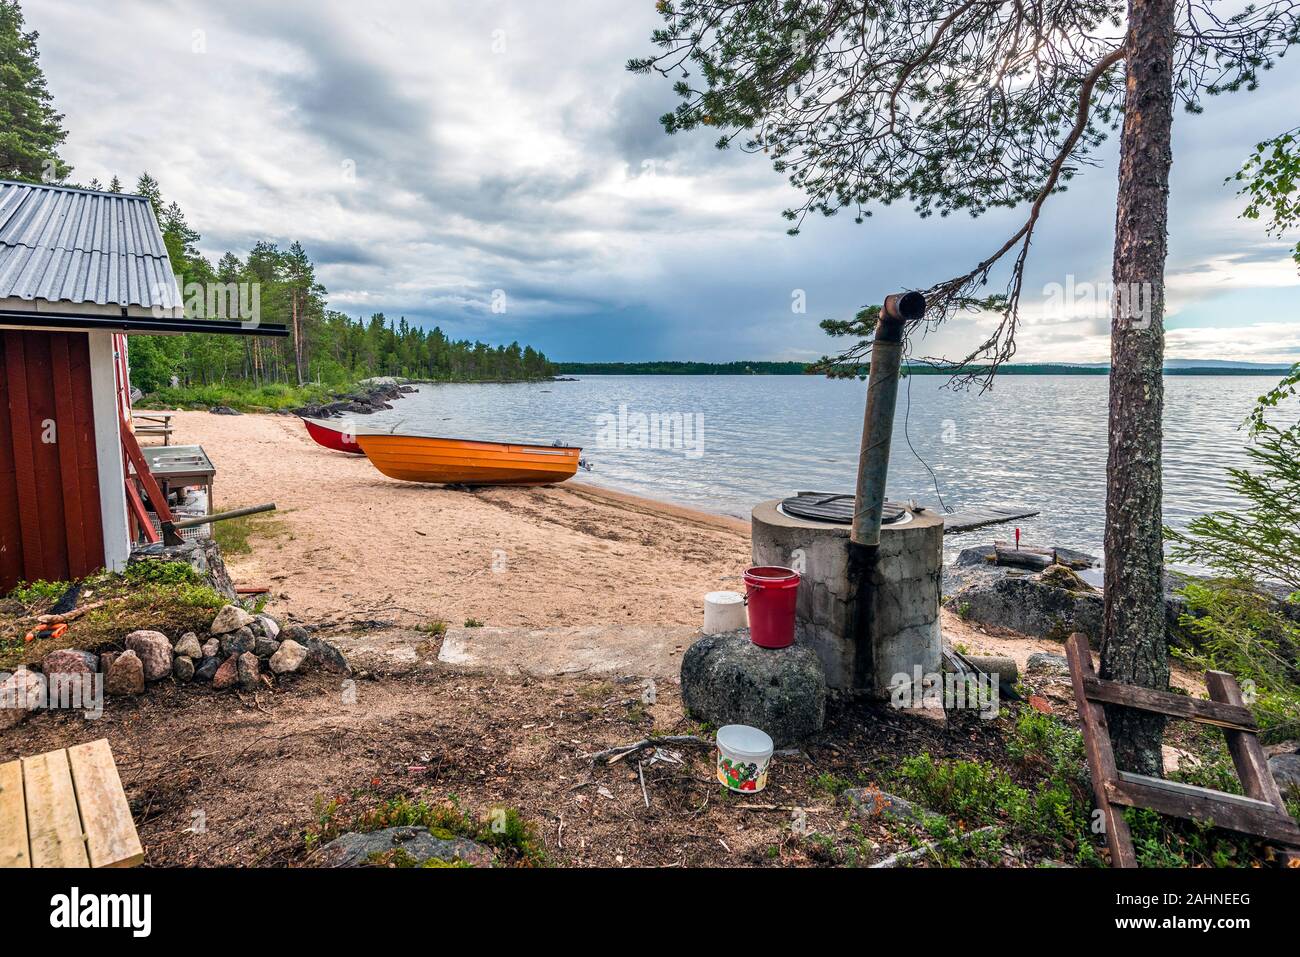 Part of the wooden house and domestic utensils in the border of Sandsjon lake in Swedish Lapland. Wood stove and motor boats are attributes of Scandin Stock Photo